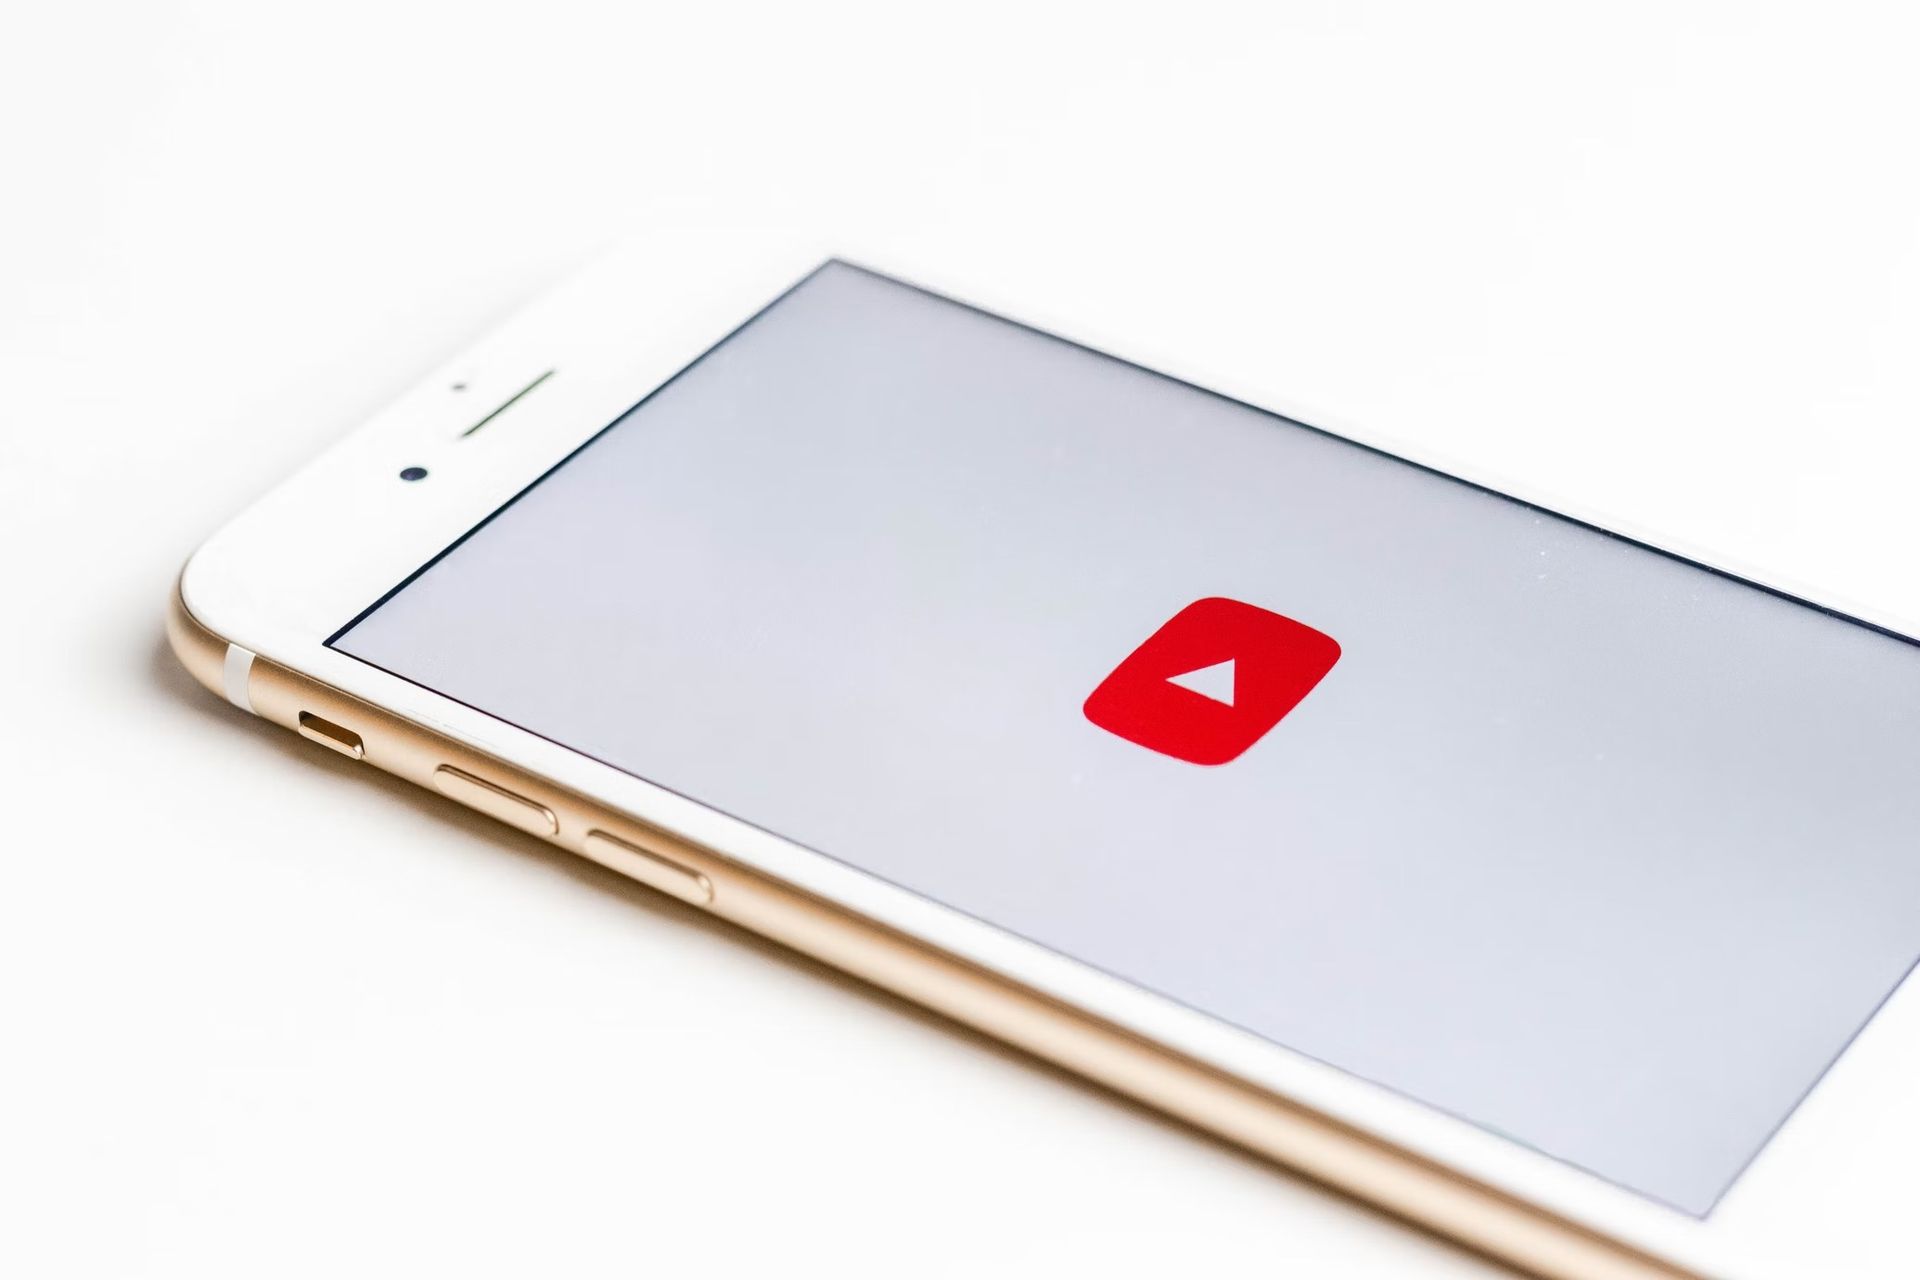 Since its debut, a lot of users have been asking the same question: Is YouTube Premium worth it? Well below, we are going to explain what is YouTube Premium, how much does it cost and dig into more details so you can make an informed decision.